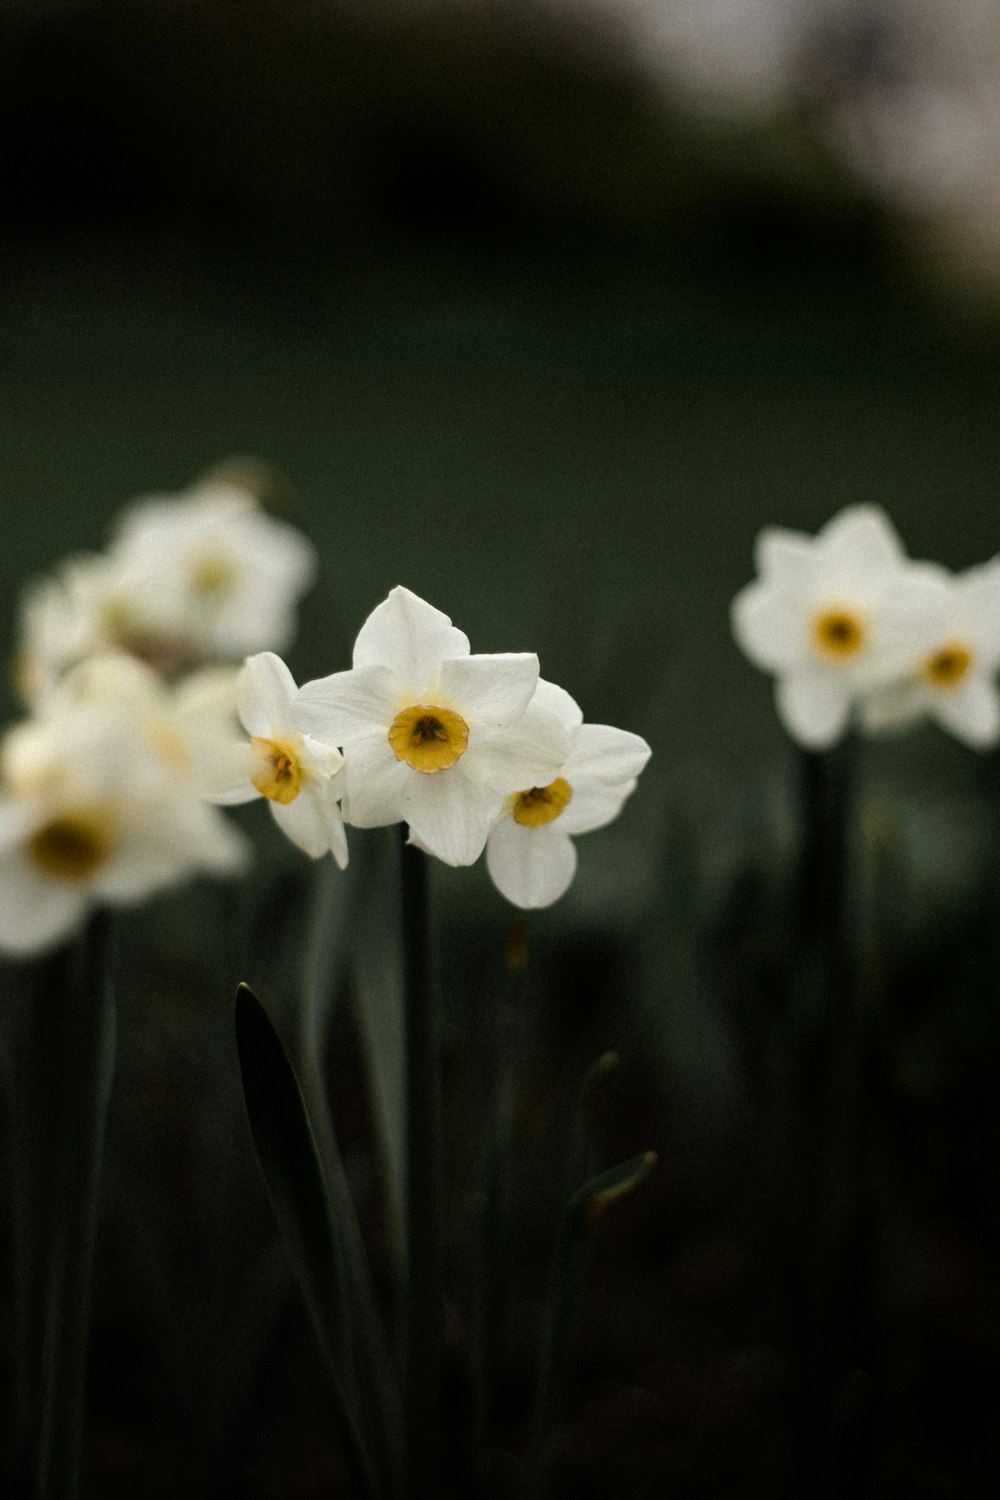 a group of white flowers with yellow centers